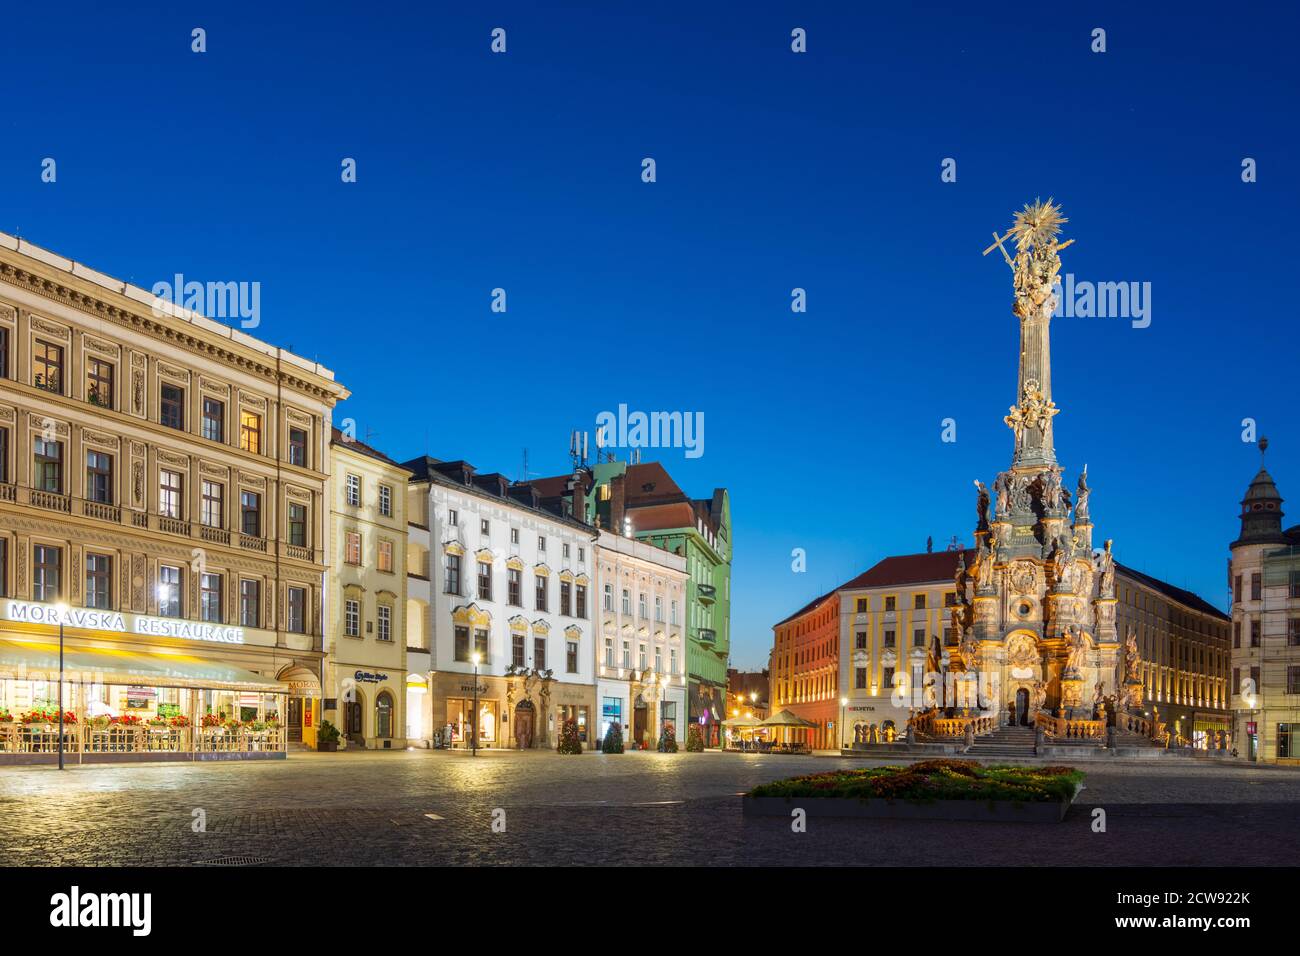 Olomouc Old Town High Resolution Stock Photography and Images - Alamy